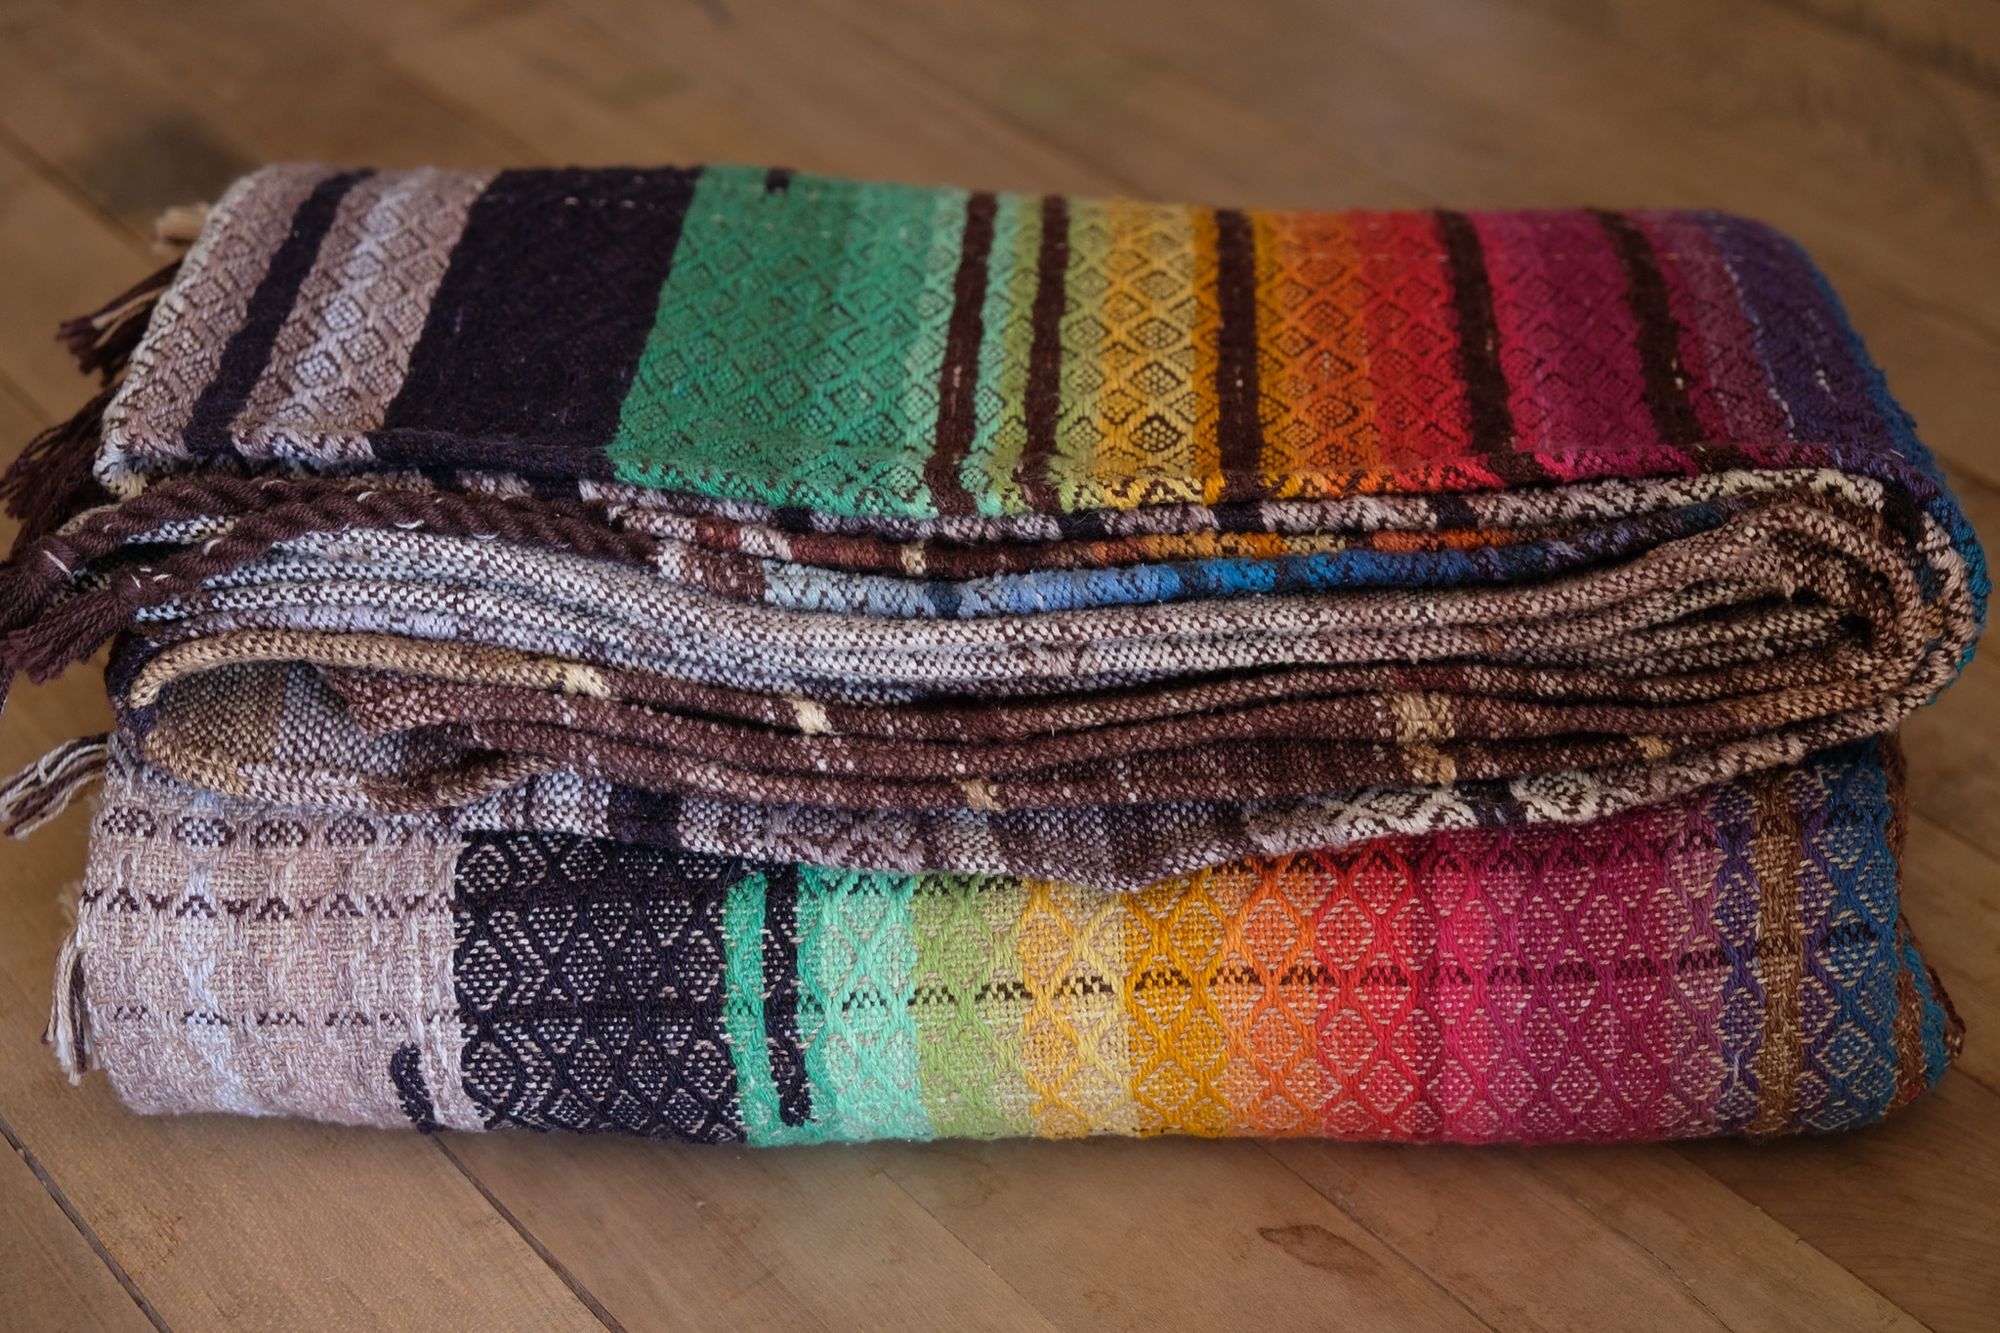 Multi colored handwoven raw silk fabric, folded and laying on a wooden floor